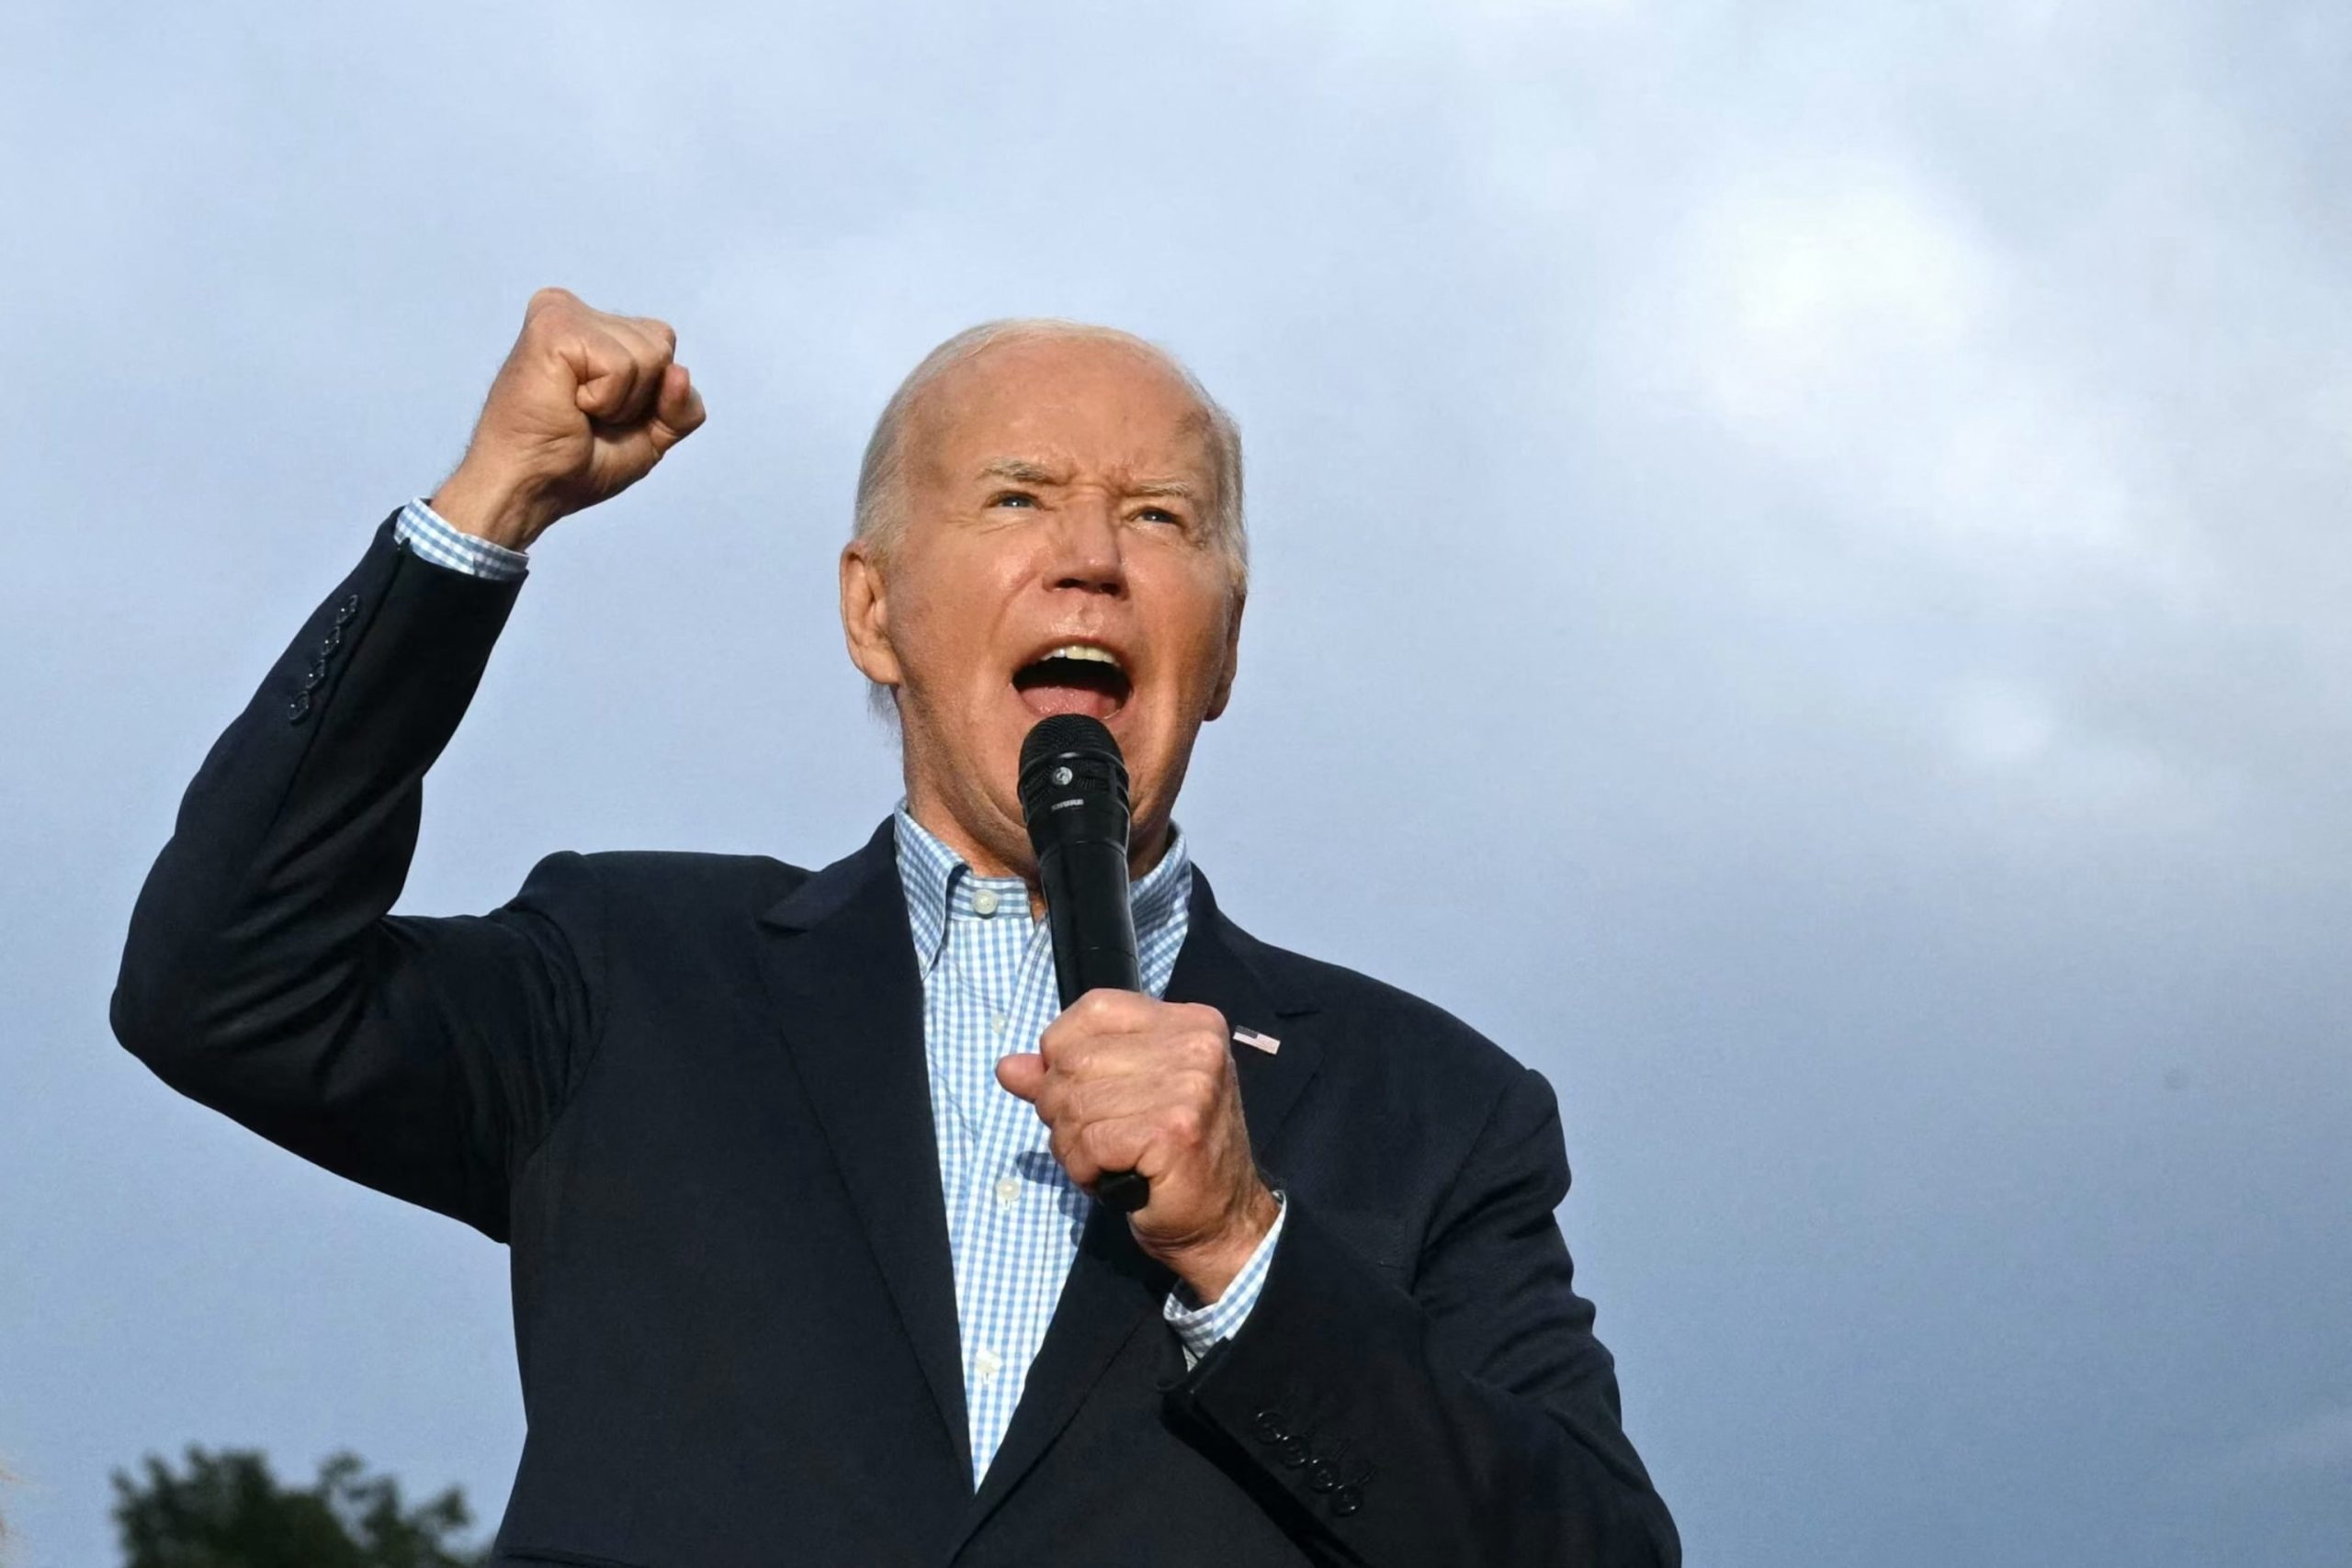 Biden holds campaign rally in Wisconsin before pivotal ABC News interview amid political crisis